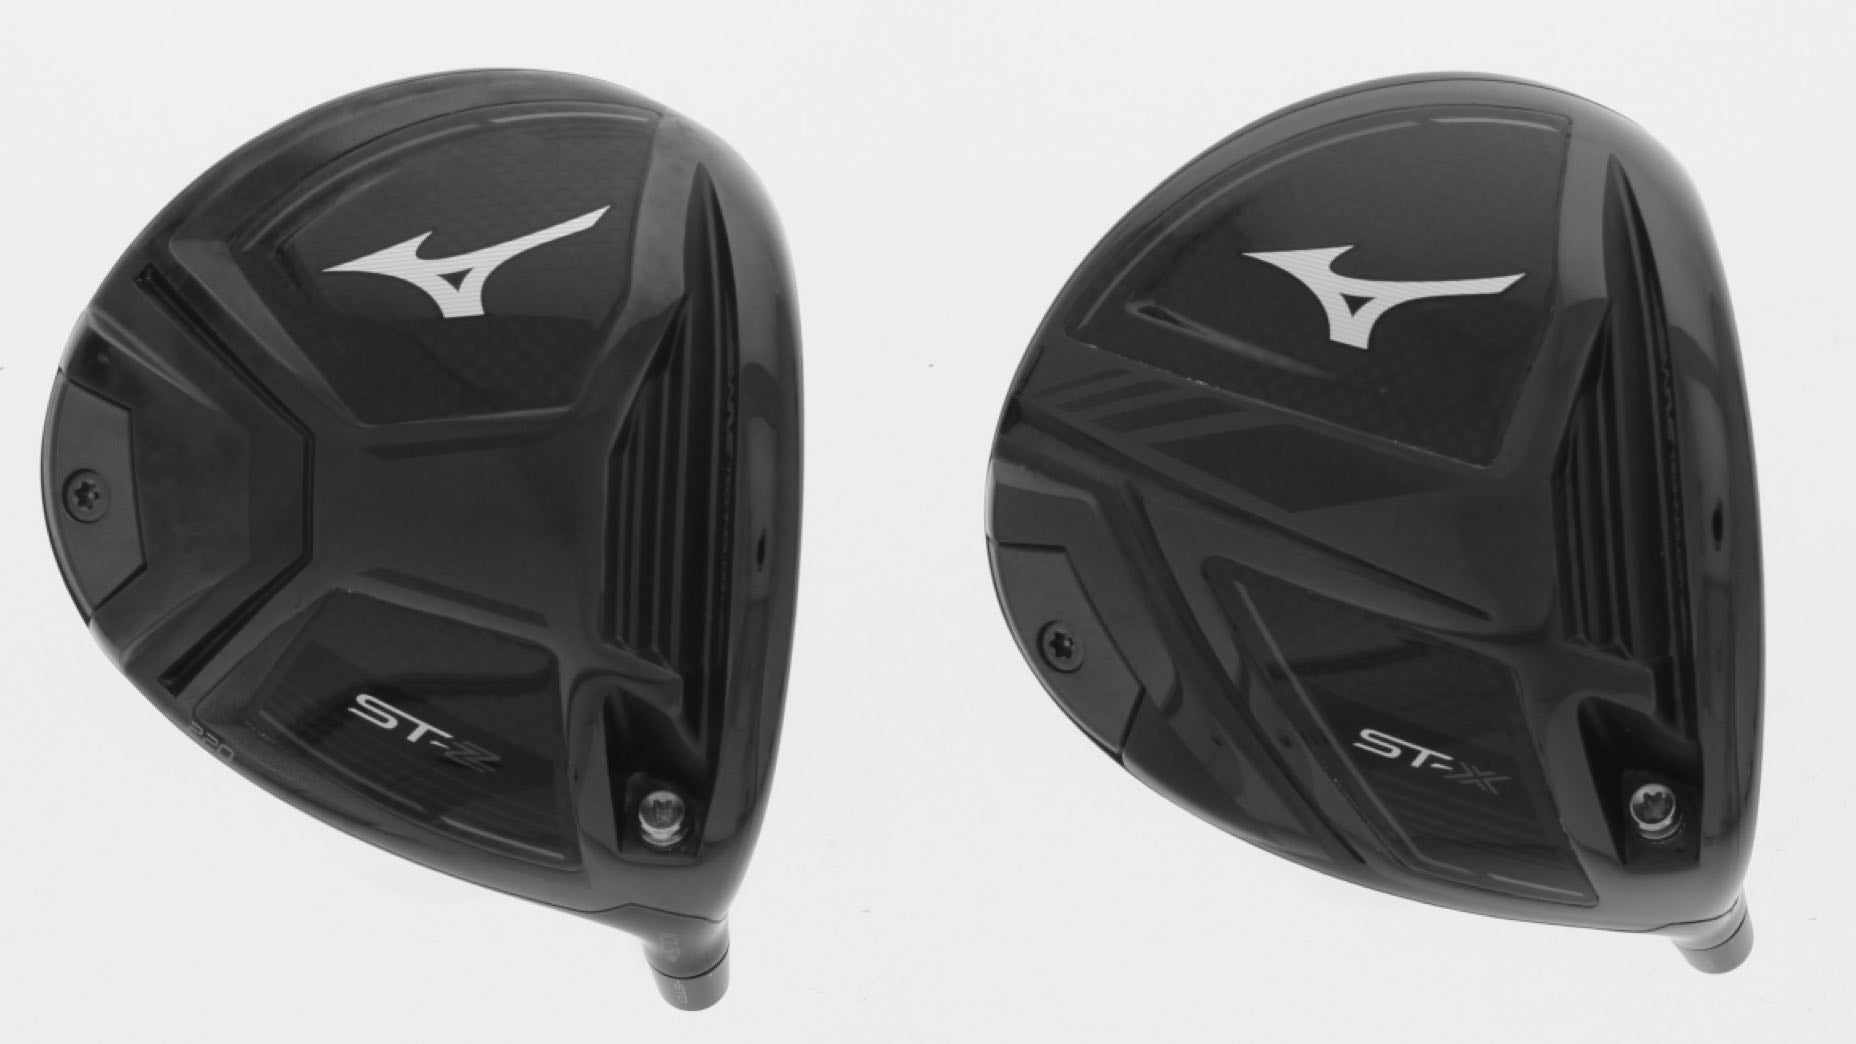 Two new Mizuno drivers land on conforming list. Here's what we know